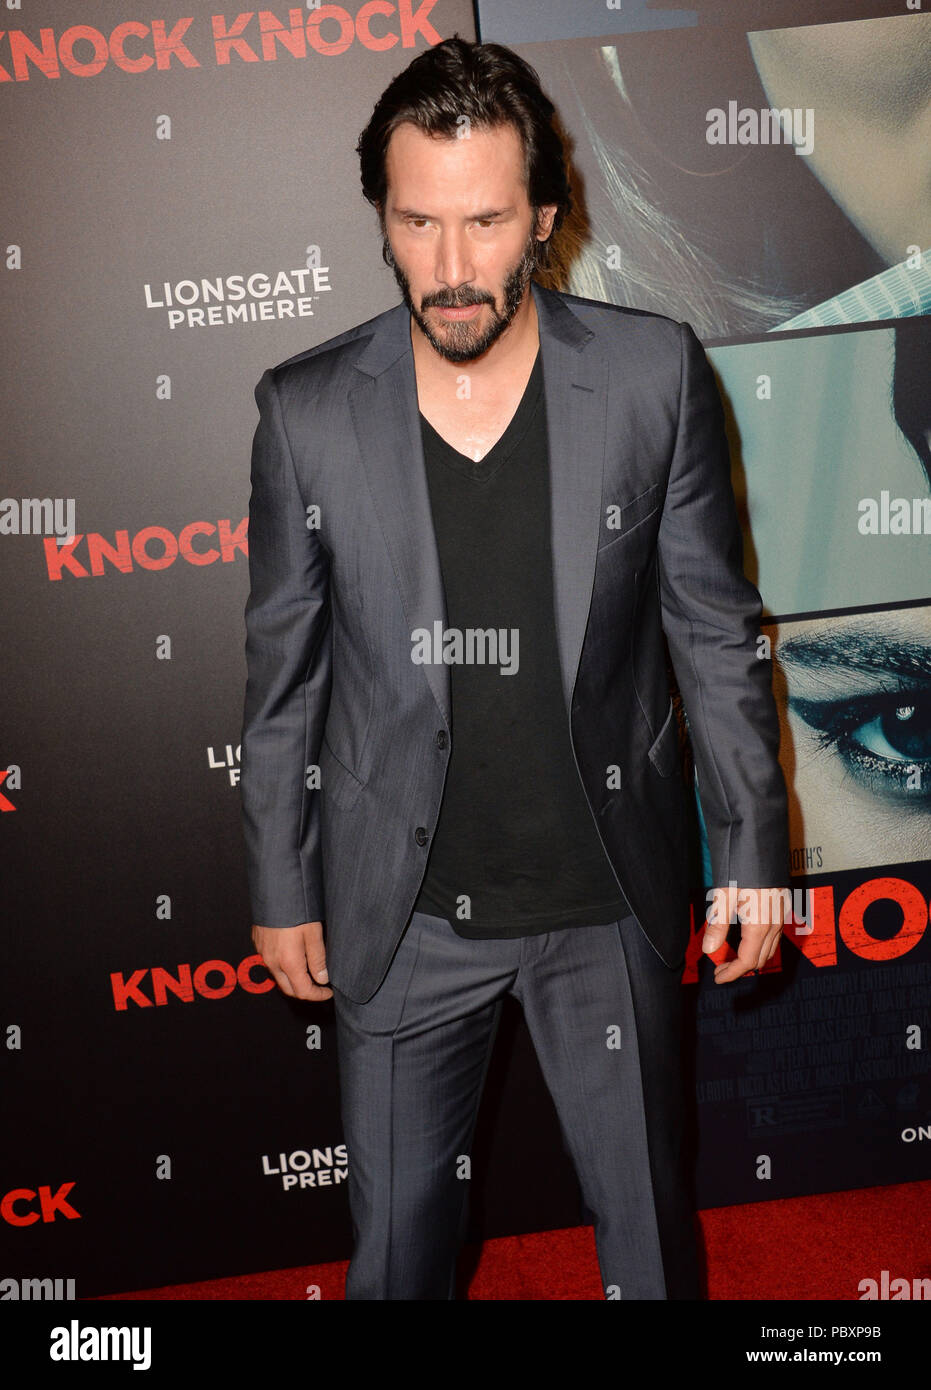 Keanu reeves 168 carpet event hi-res stock photography images - Alamy